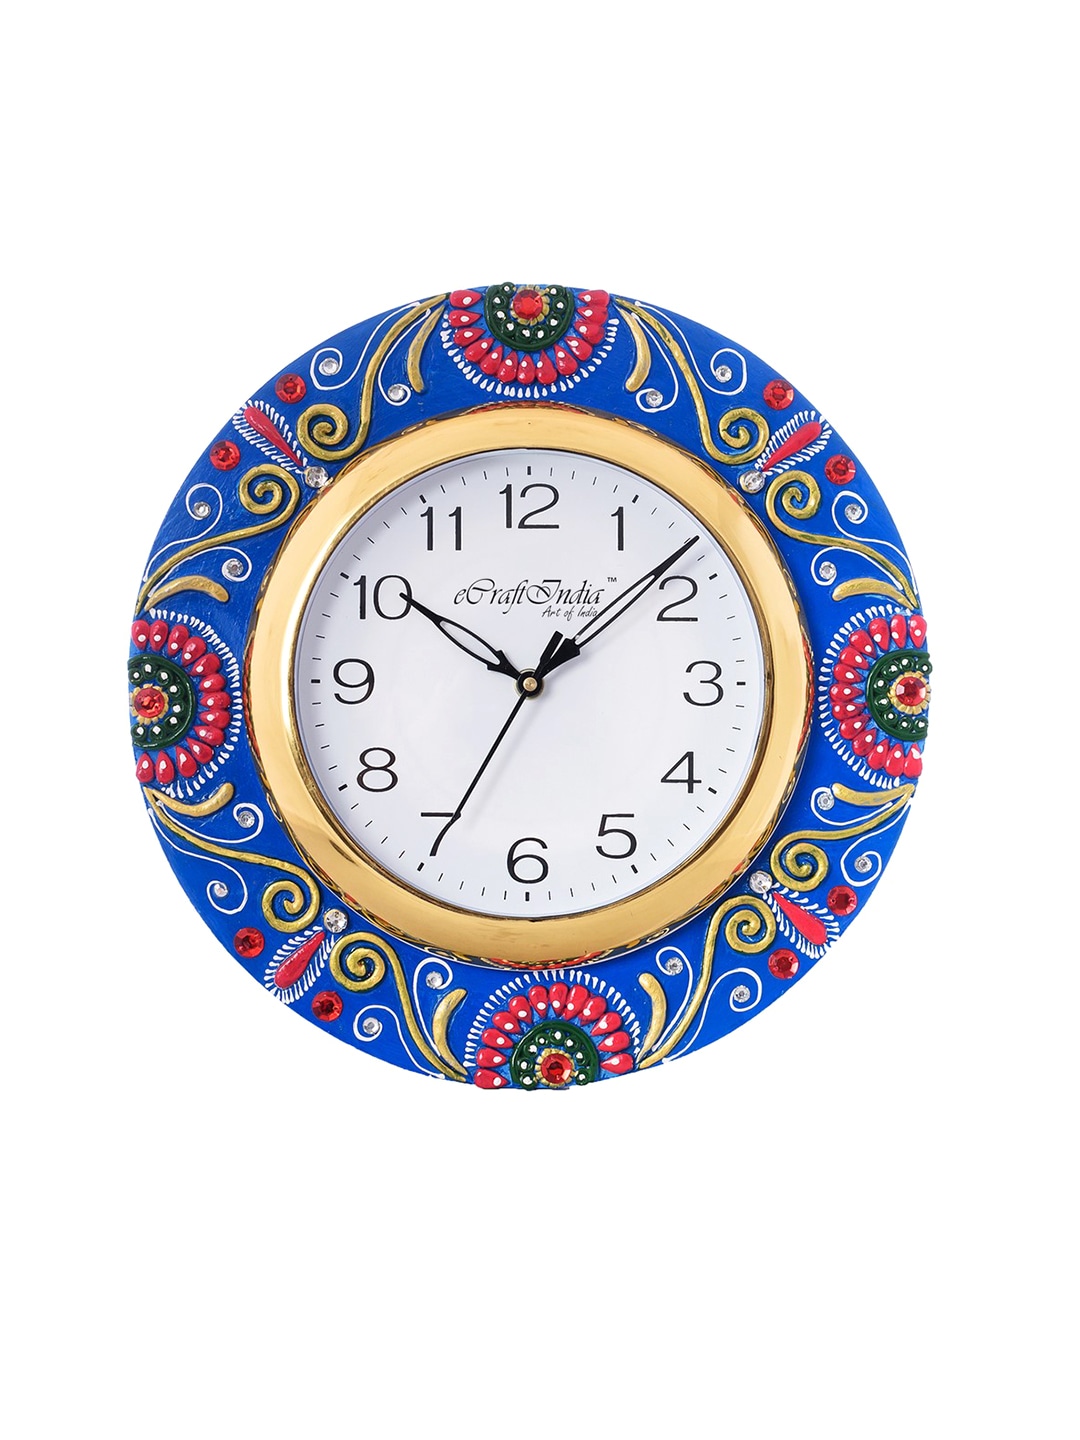 eCraftIndia White Dial Papier Mache Stone-Studded Wooden Handcrafted 30.734 cm Analogue Wall Clock Price in India